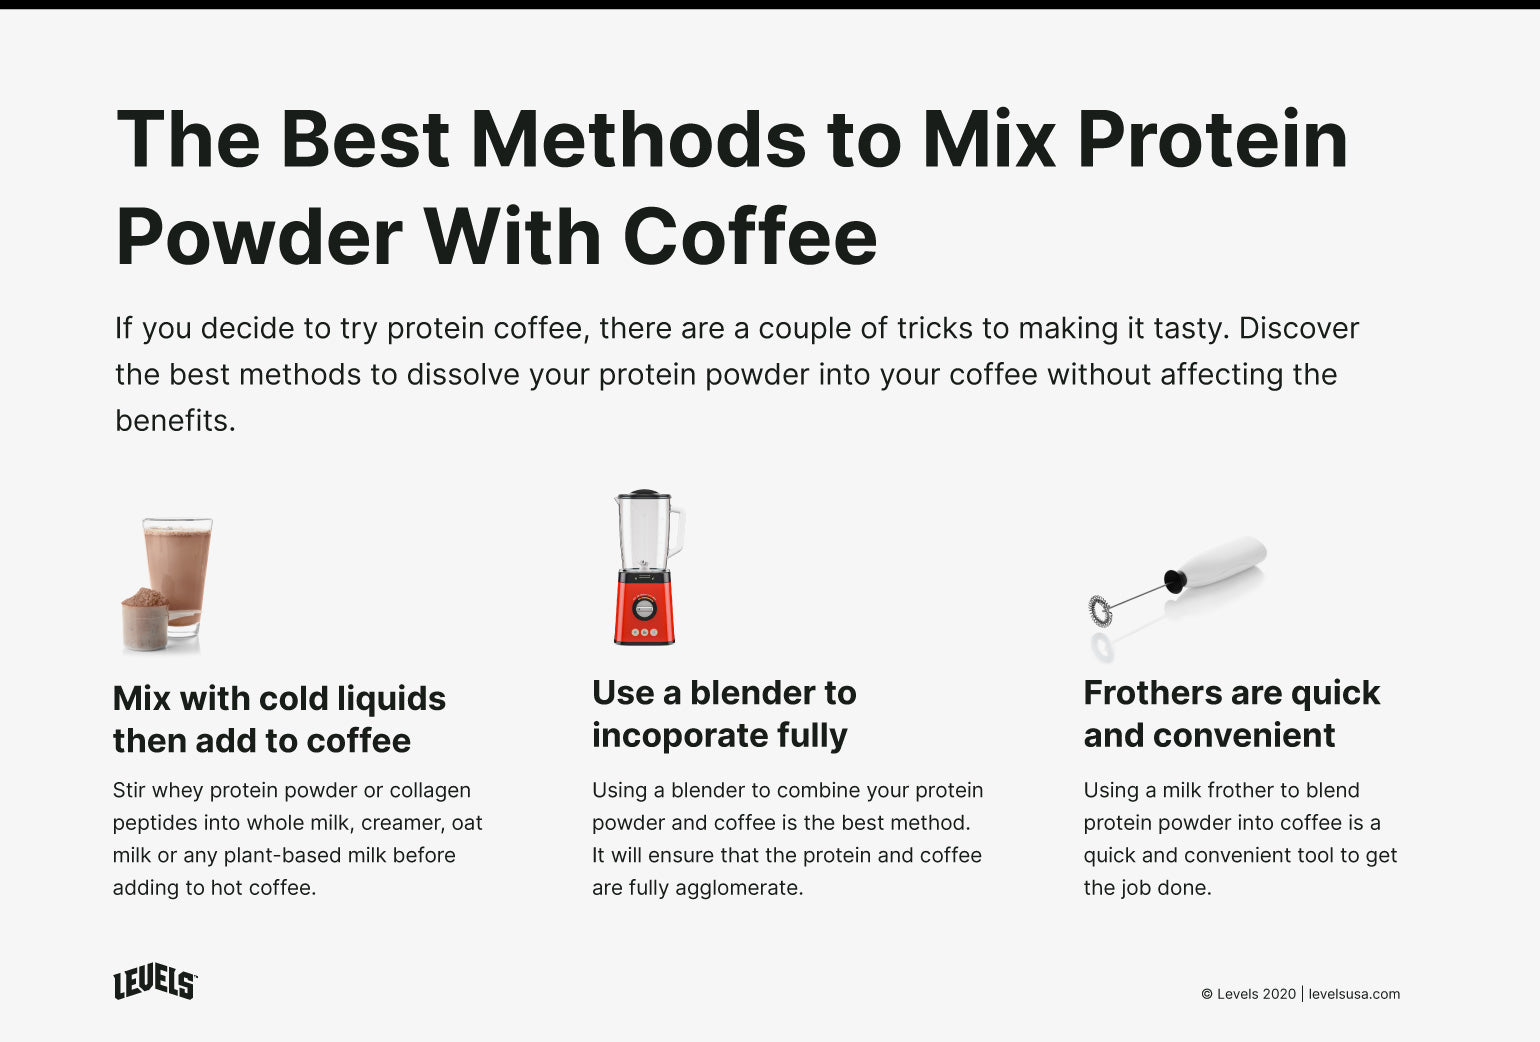 How to Mix Protein Powder with Coffee - Infographic